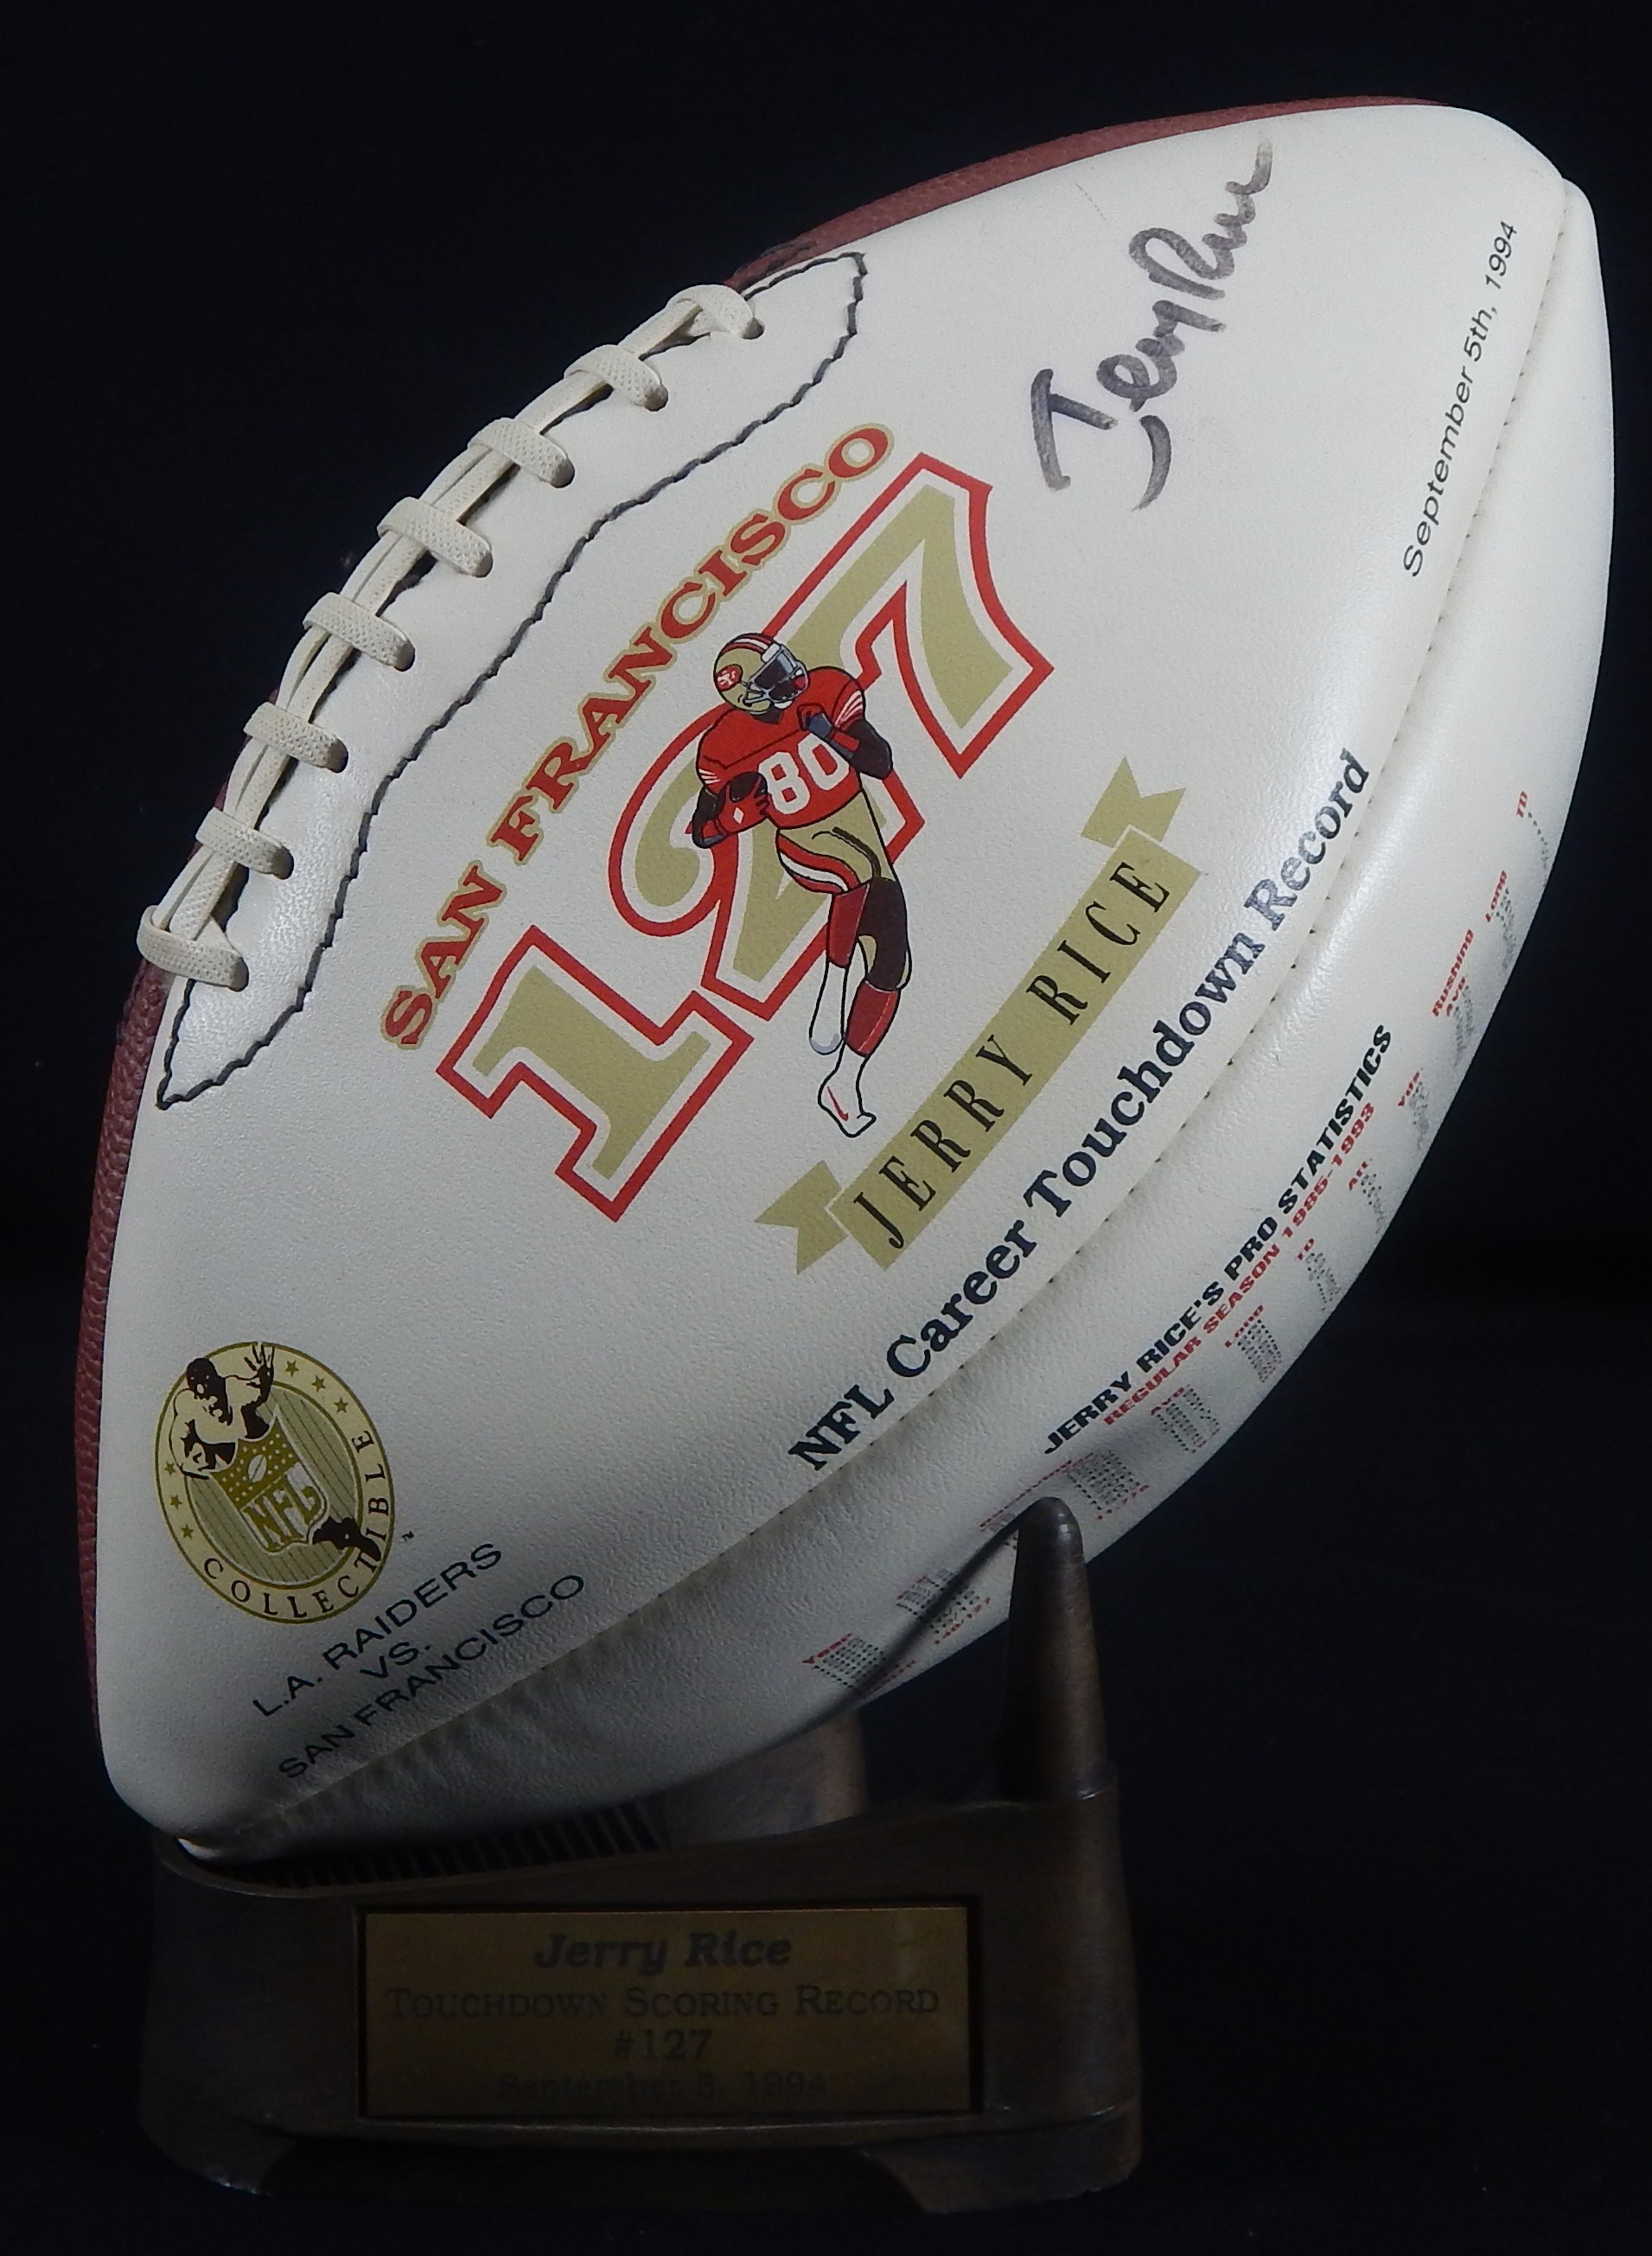 Football - Jerry Rice Touchdown Record Breaking Commemorative Signed Football (PSA/DNA)